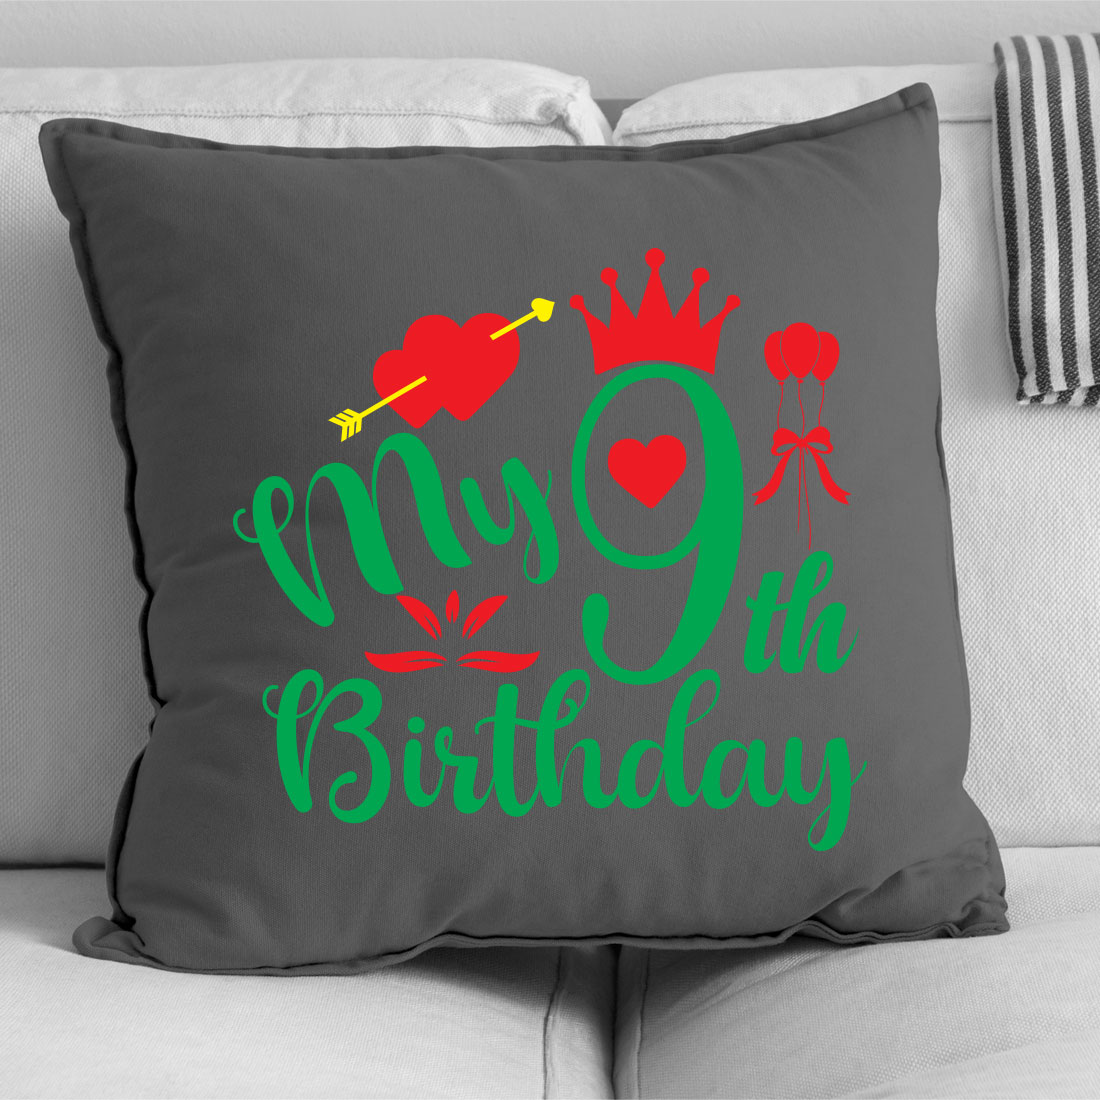 Gray pillow with a green and red design on it.